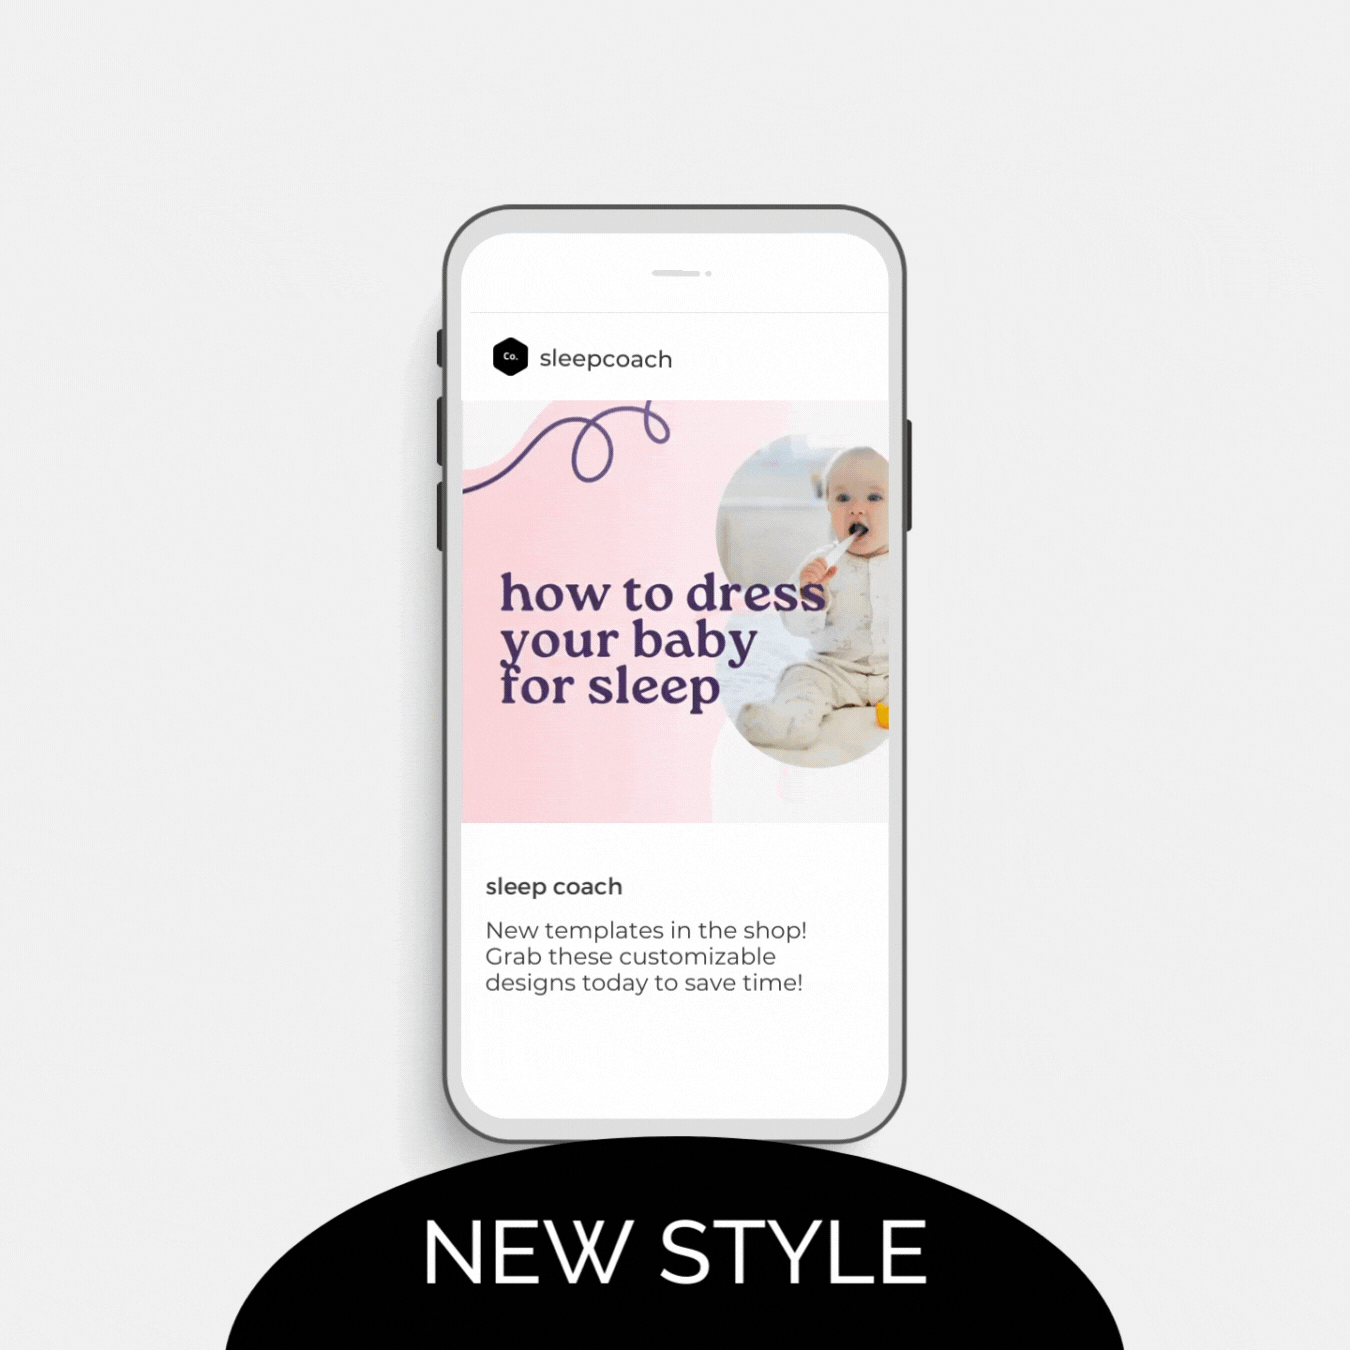 Carousel Post Template - How to Dress Baby